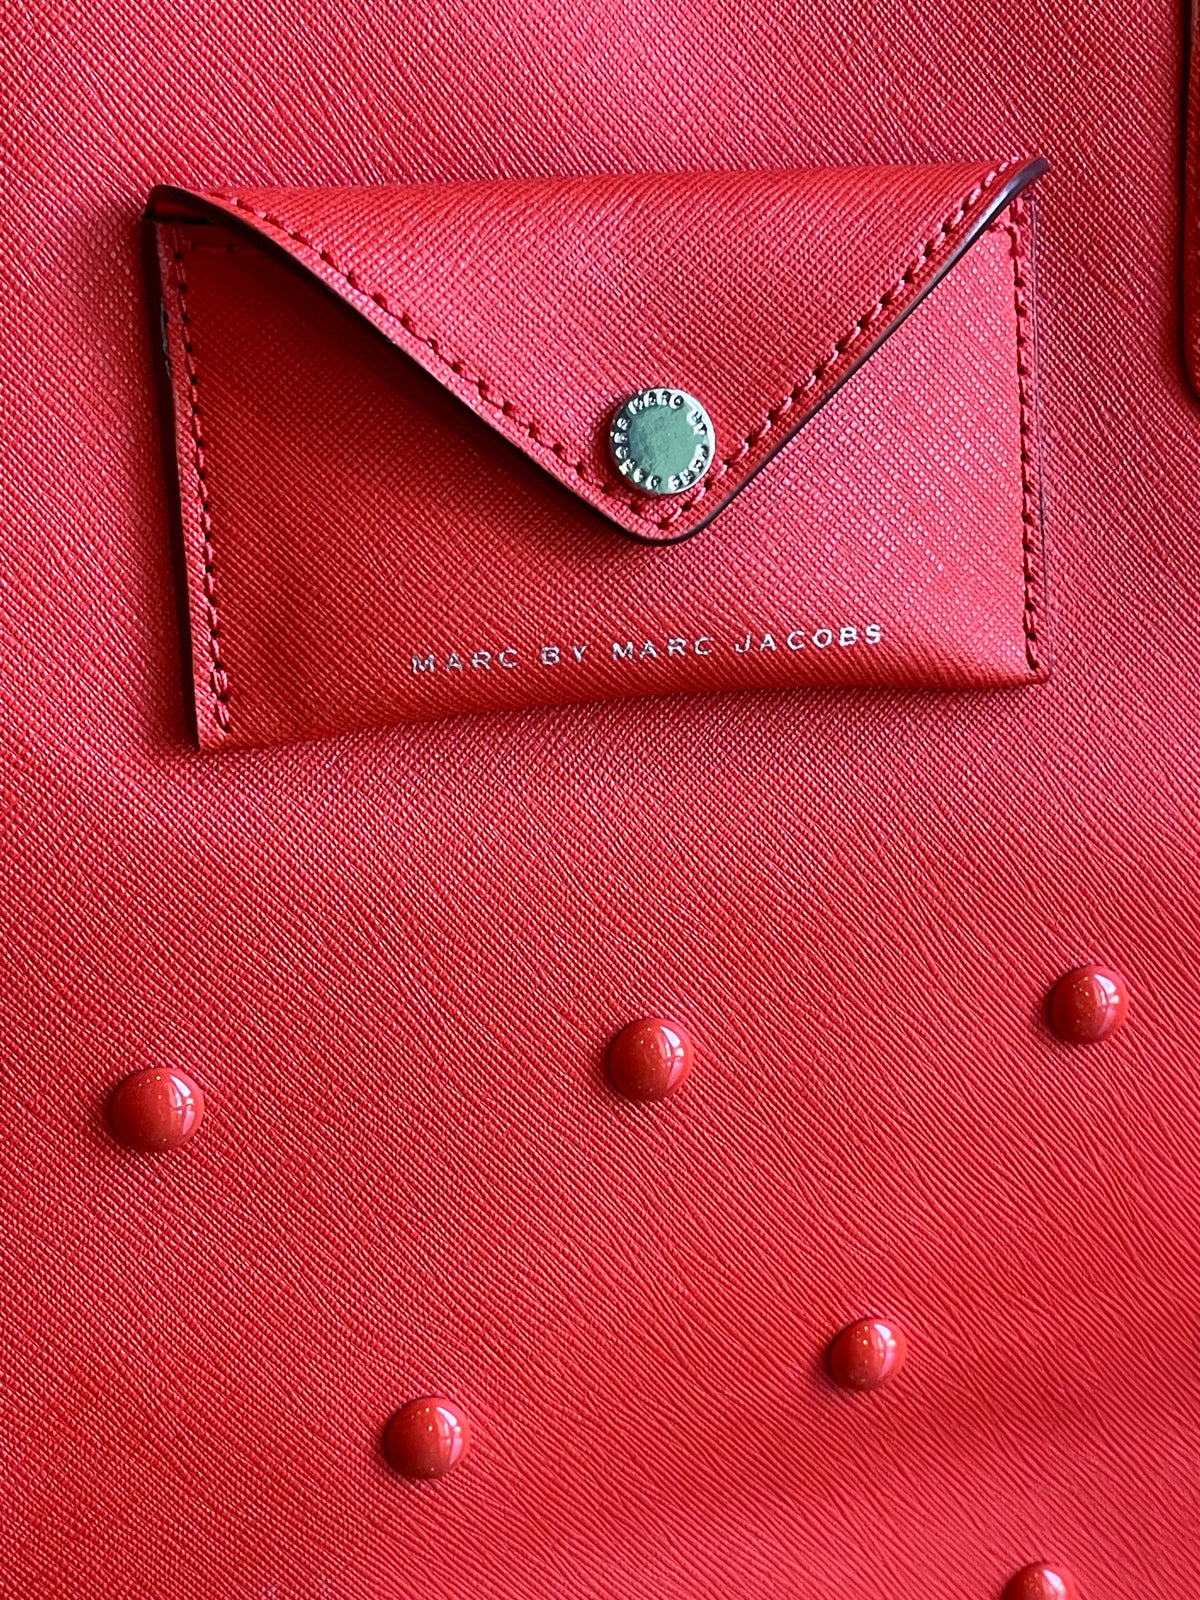 MARC BY MARC JACOBS Red Studded Tote